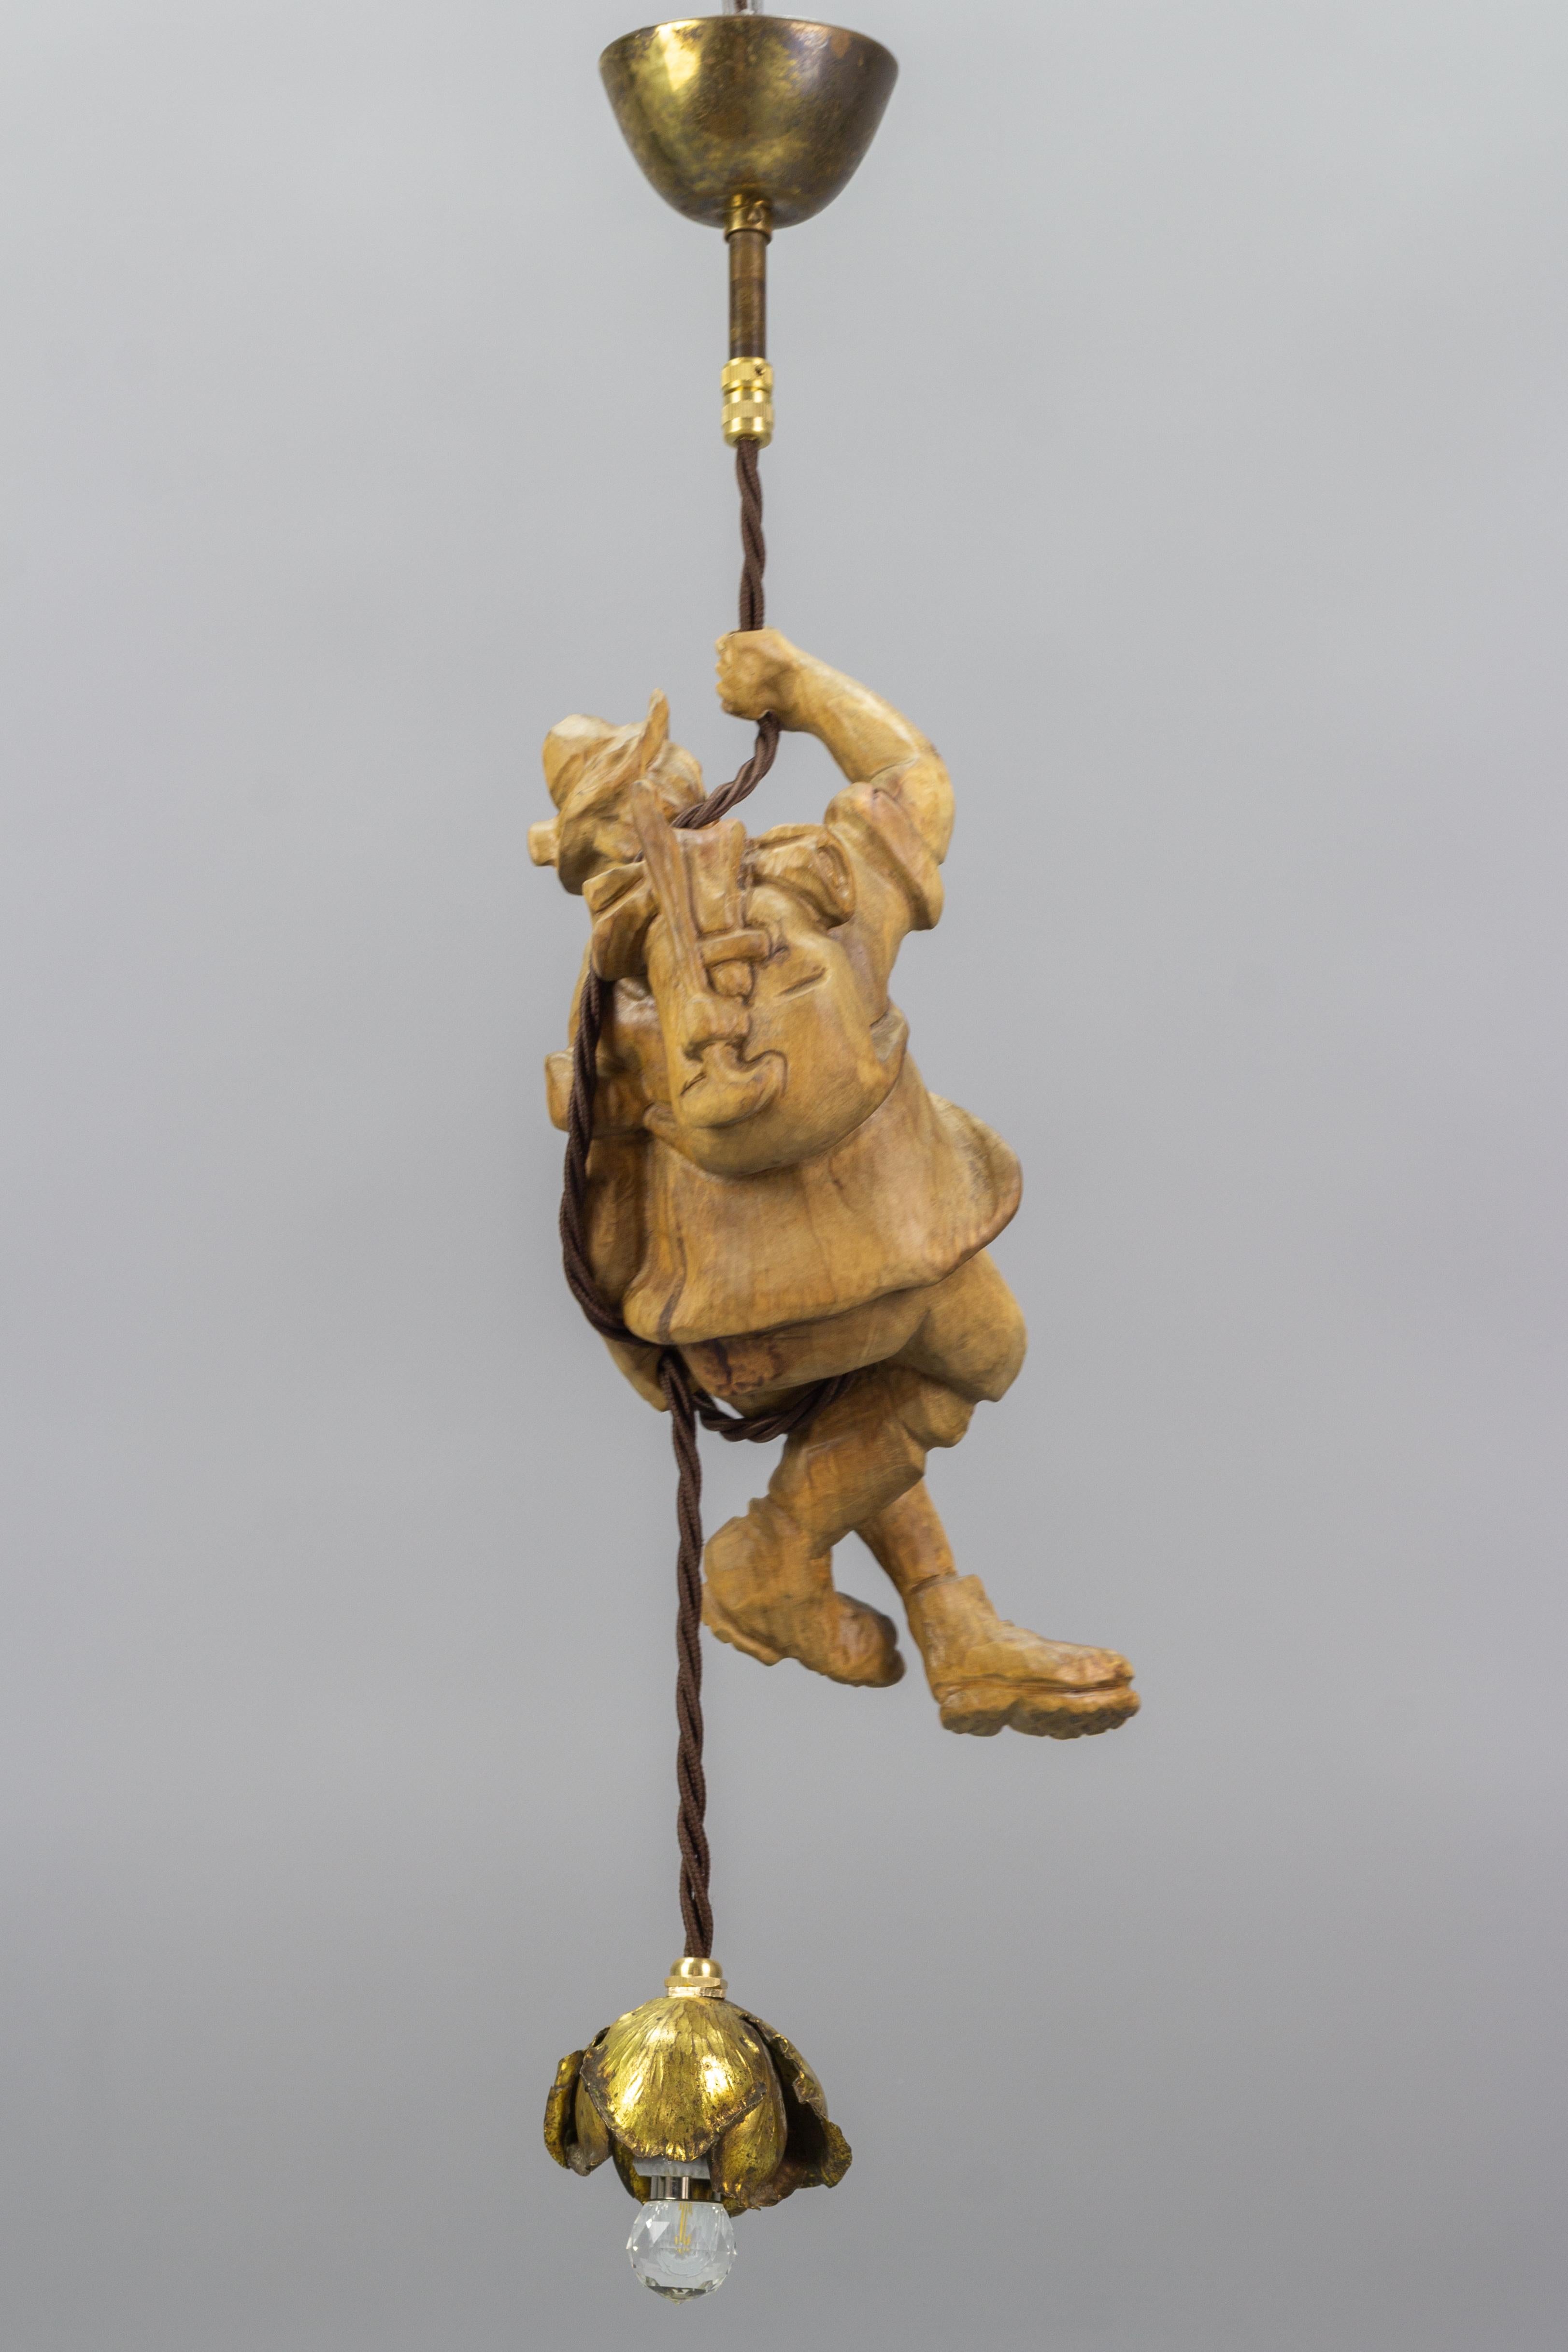 Hanging Brass Light Fixture with a Wooden Figure of a Mountain Climber In Good Condition For Sale In Barntrup, DE